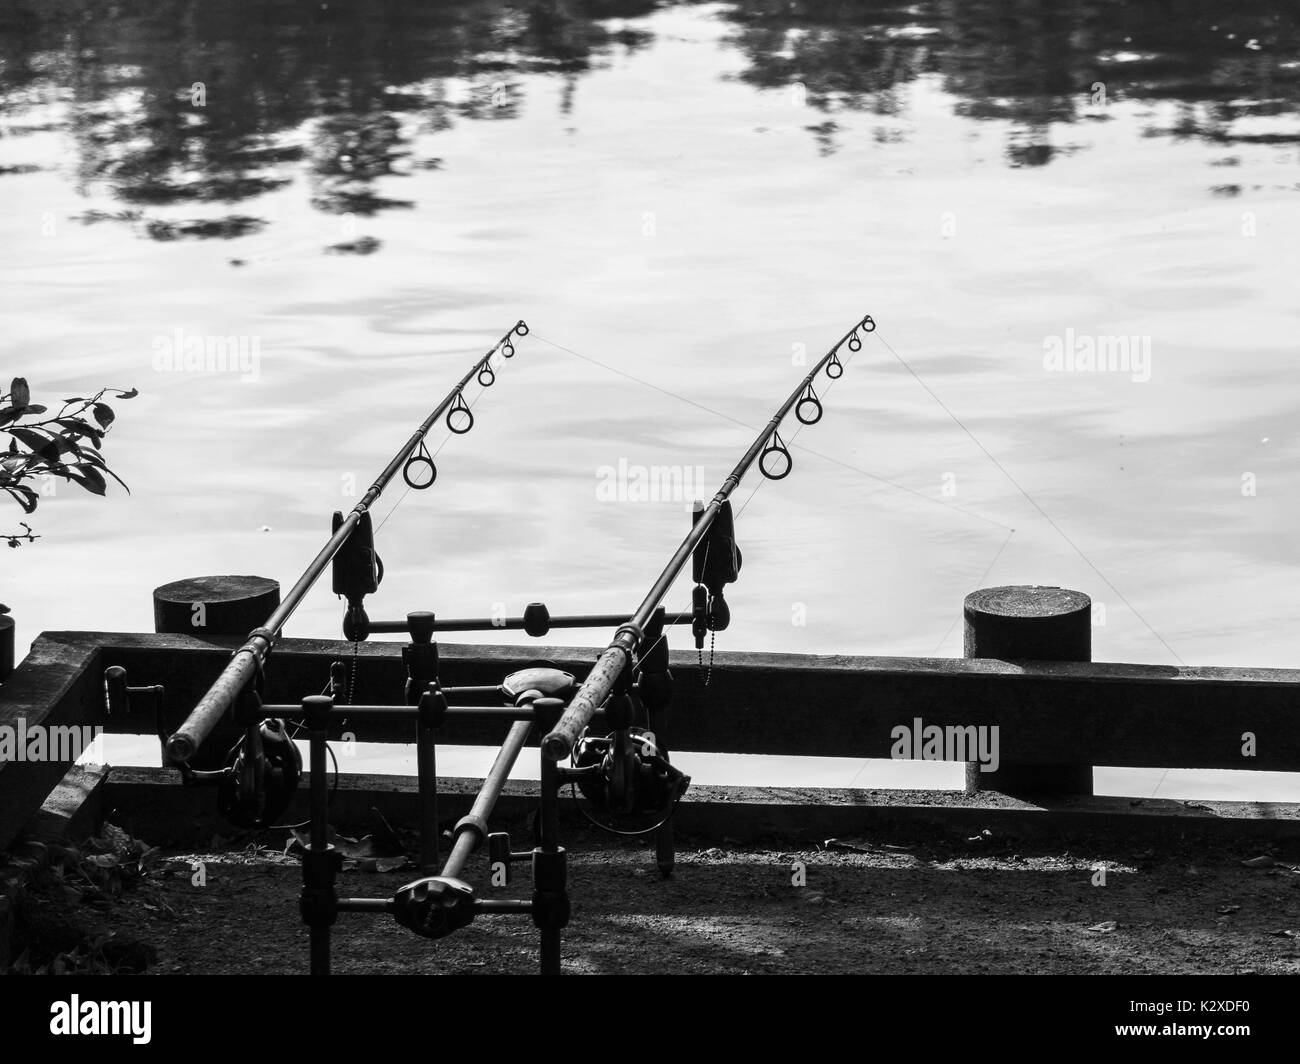 Two rods on a stand fishing in a lake Stock Photo